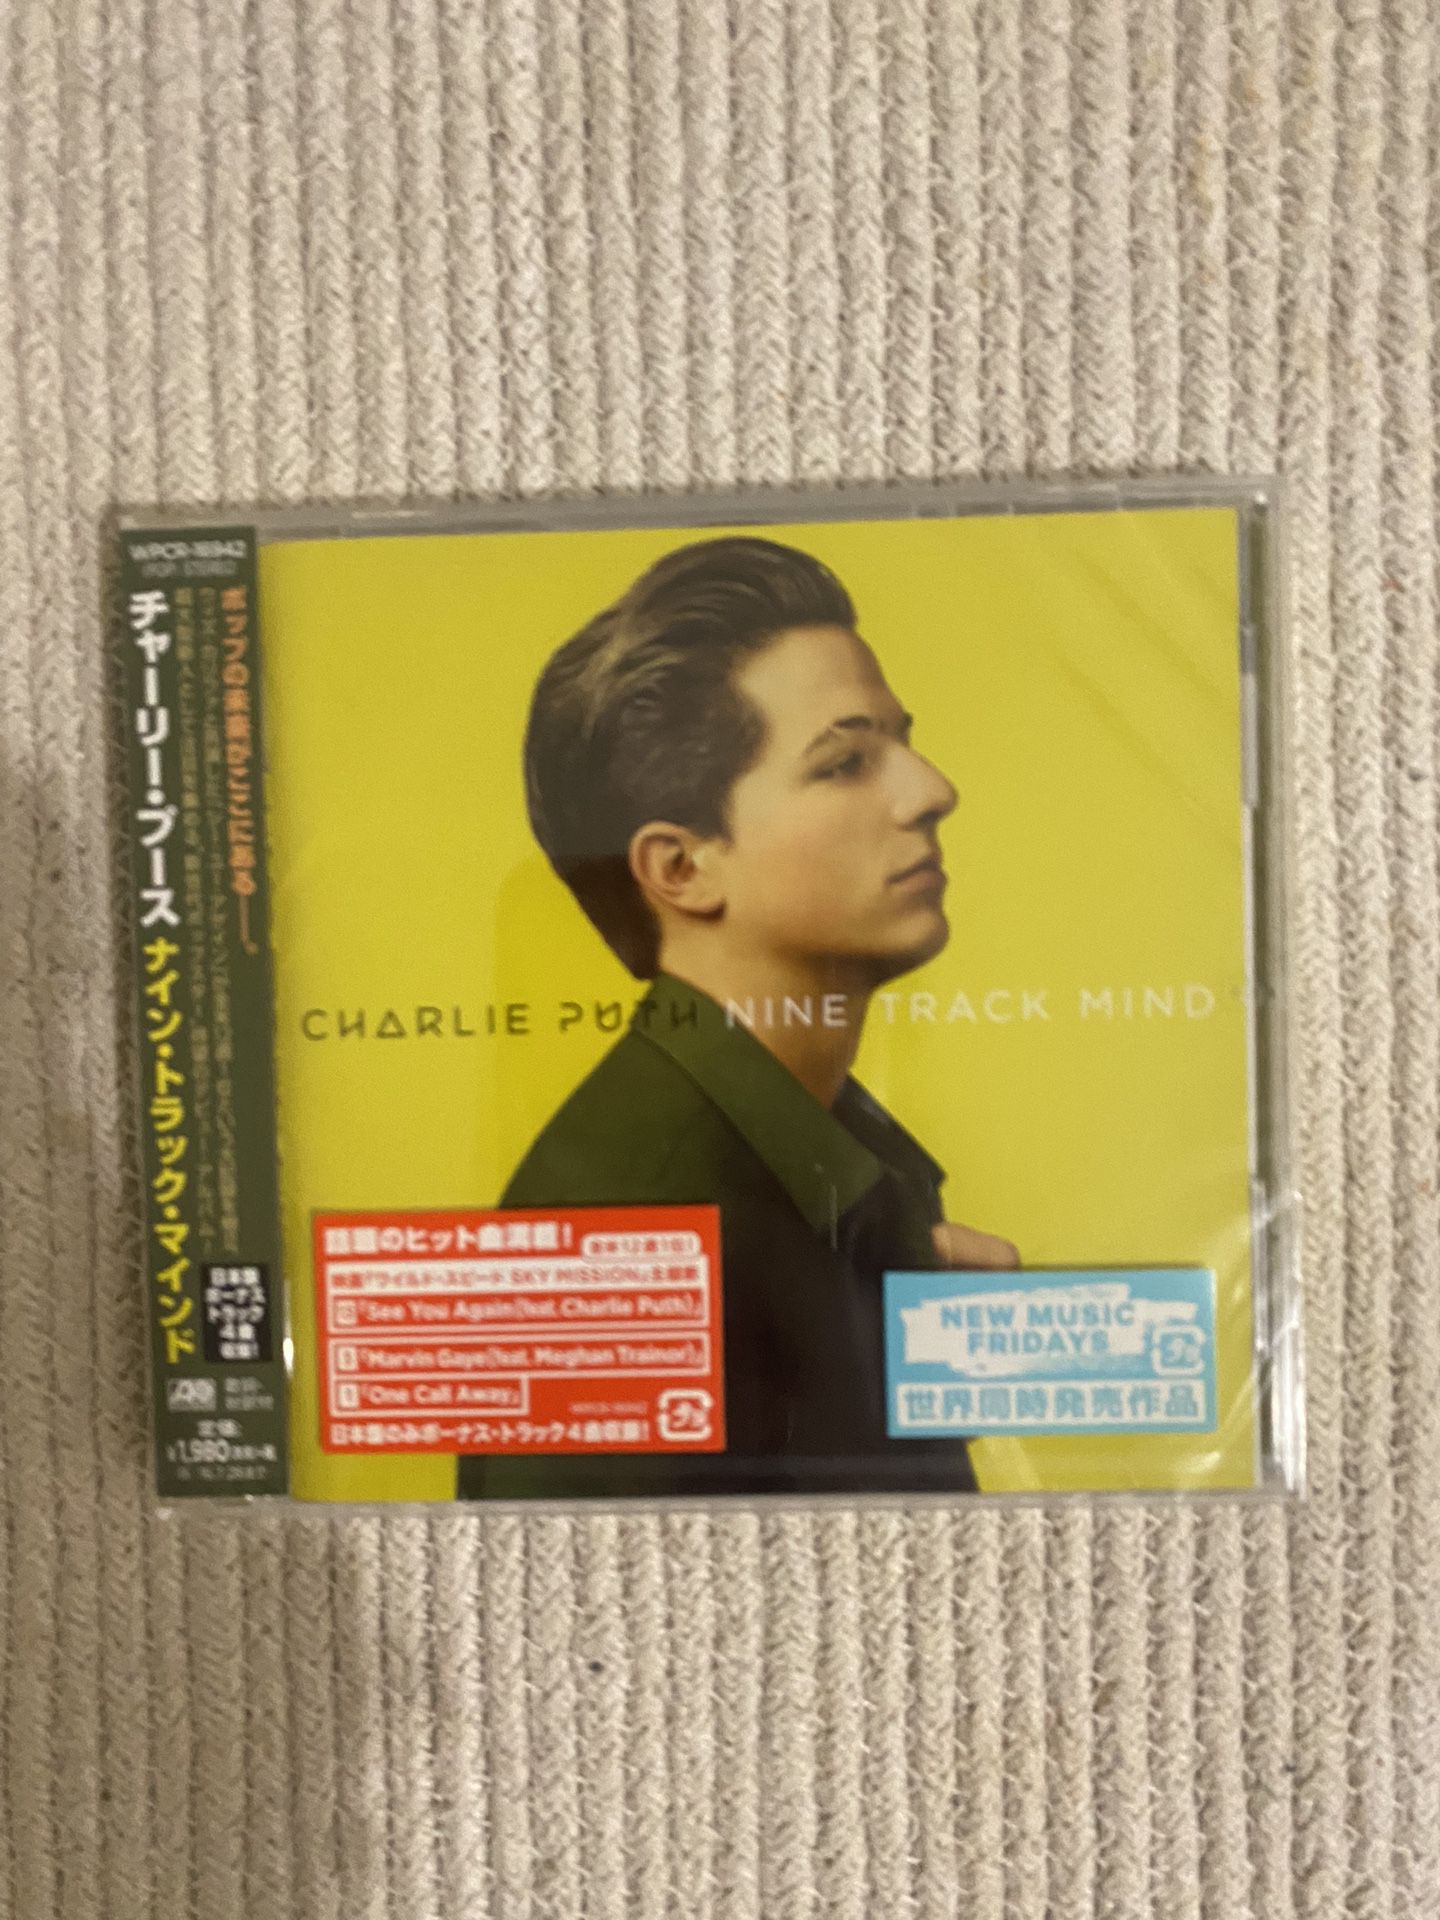 Charlie puth Nine Track Mind Deluxe cd for Sale in The Bronx, NY